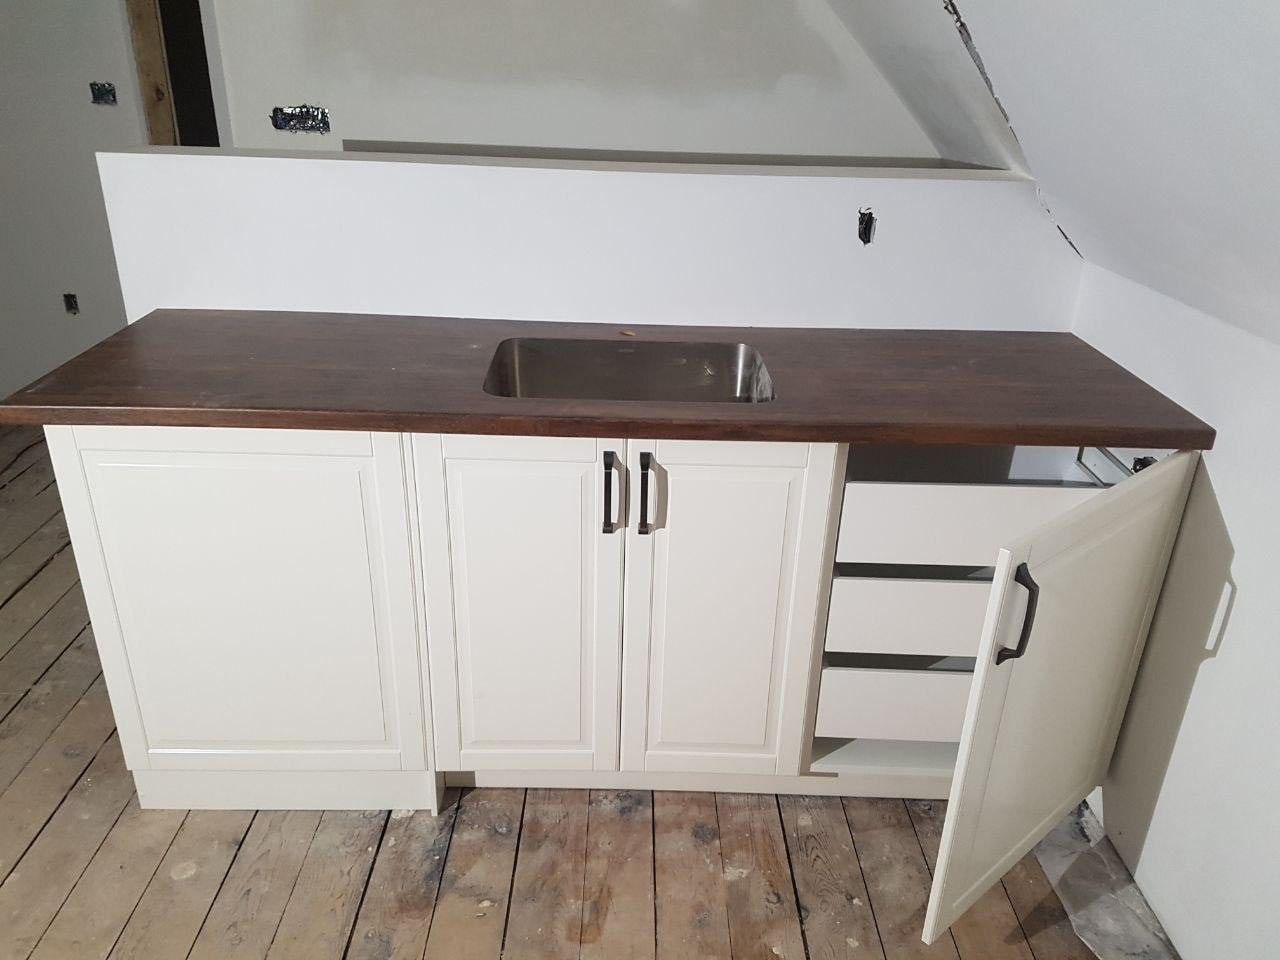 Kitchenette 7ft long with IKEA butcher block countertop and BOODBYN off-white doors style